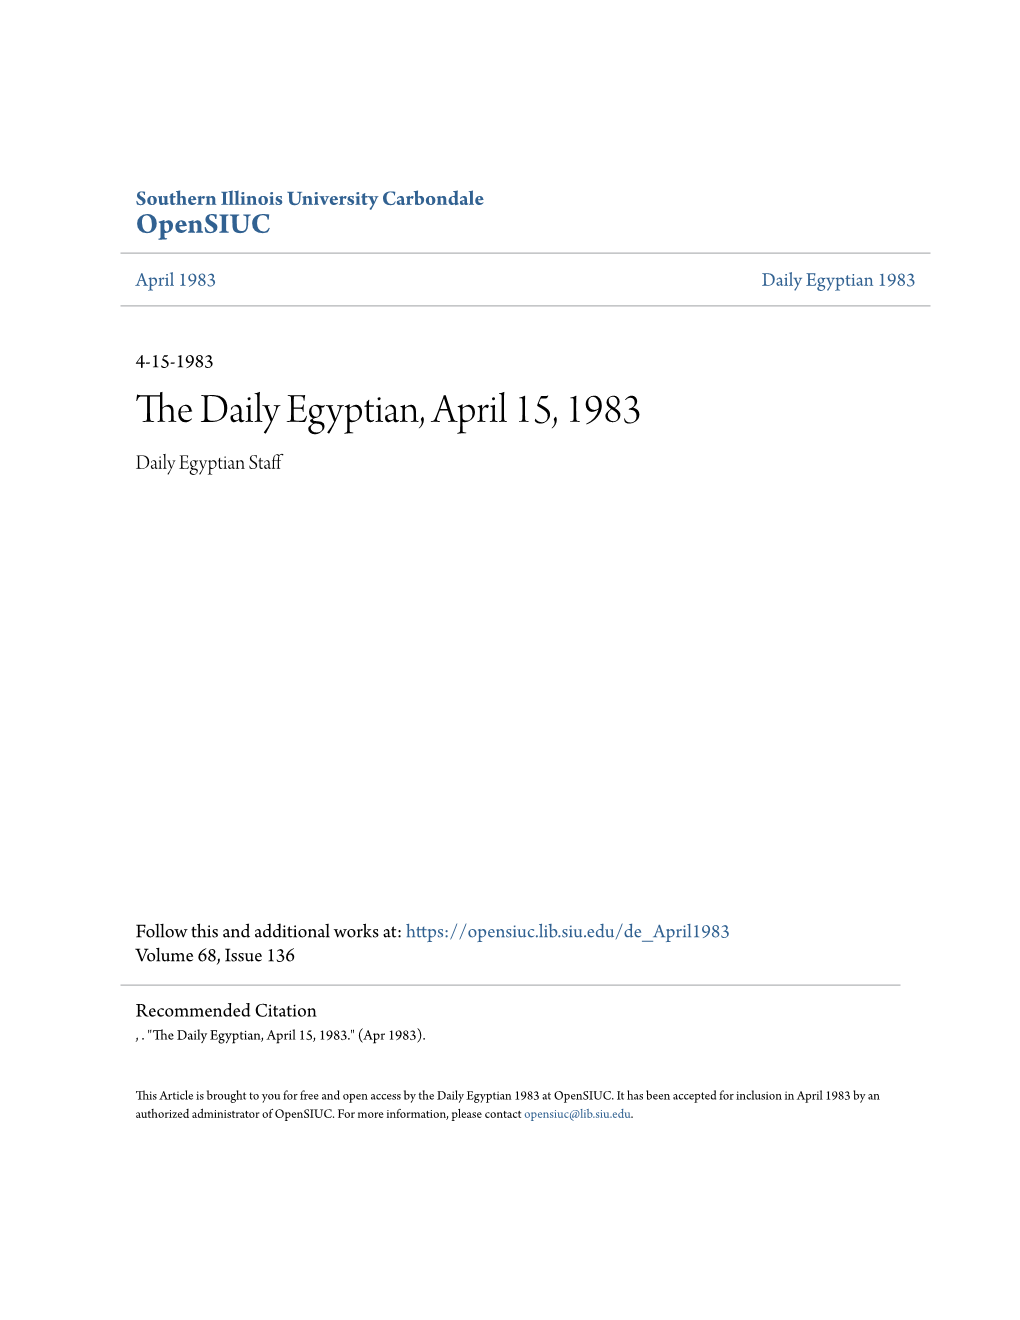 The Daily Egyptian, April 15, 1983